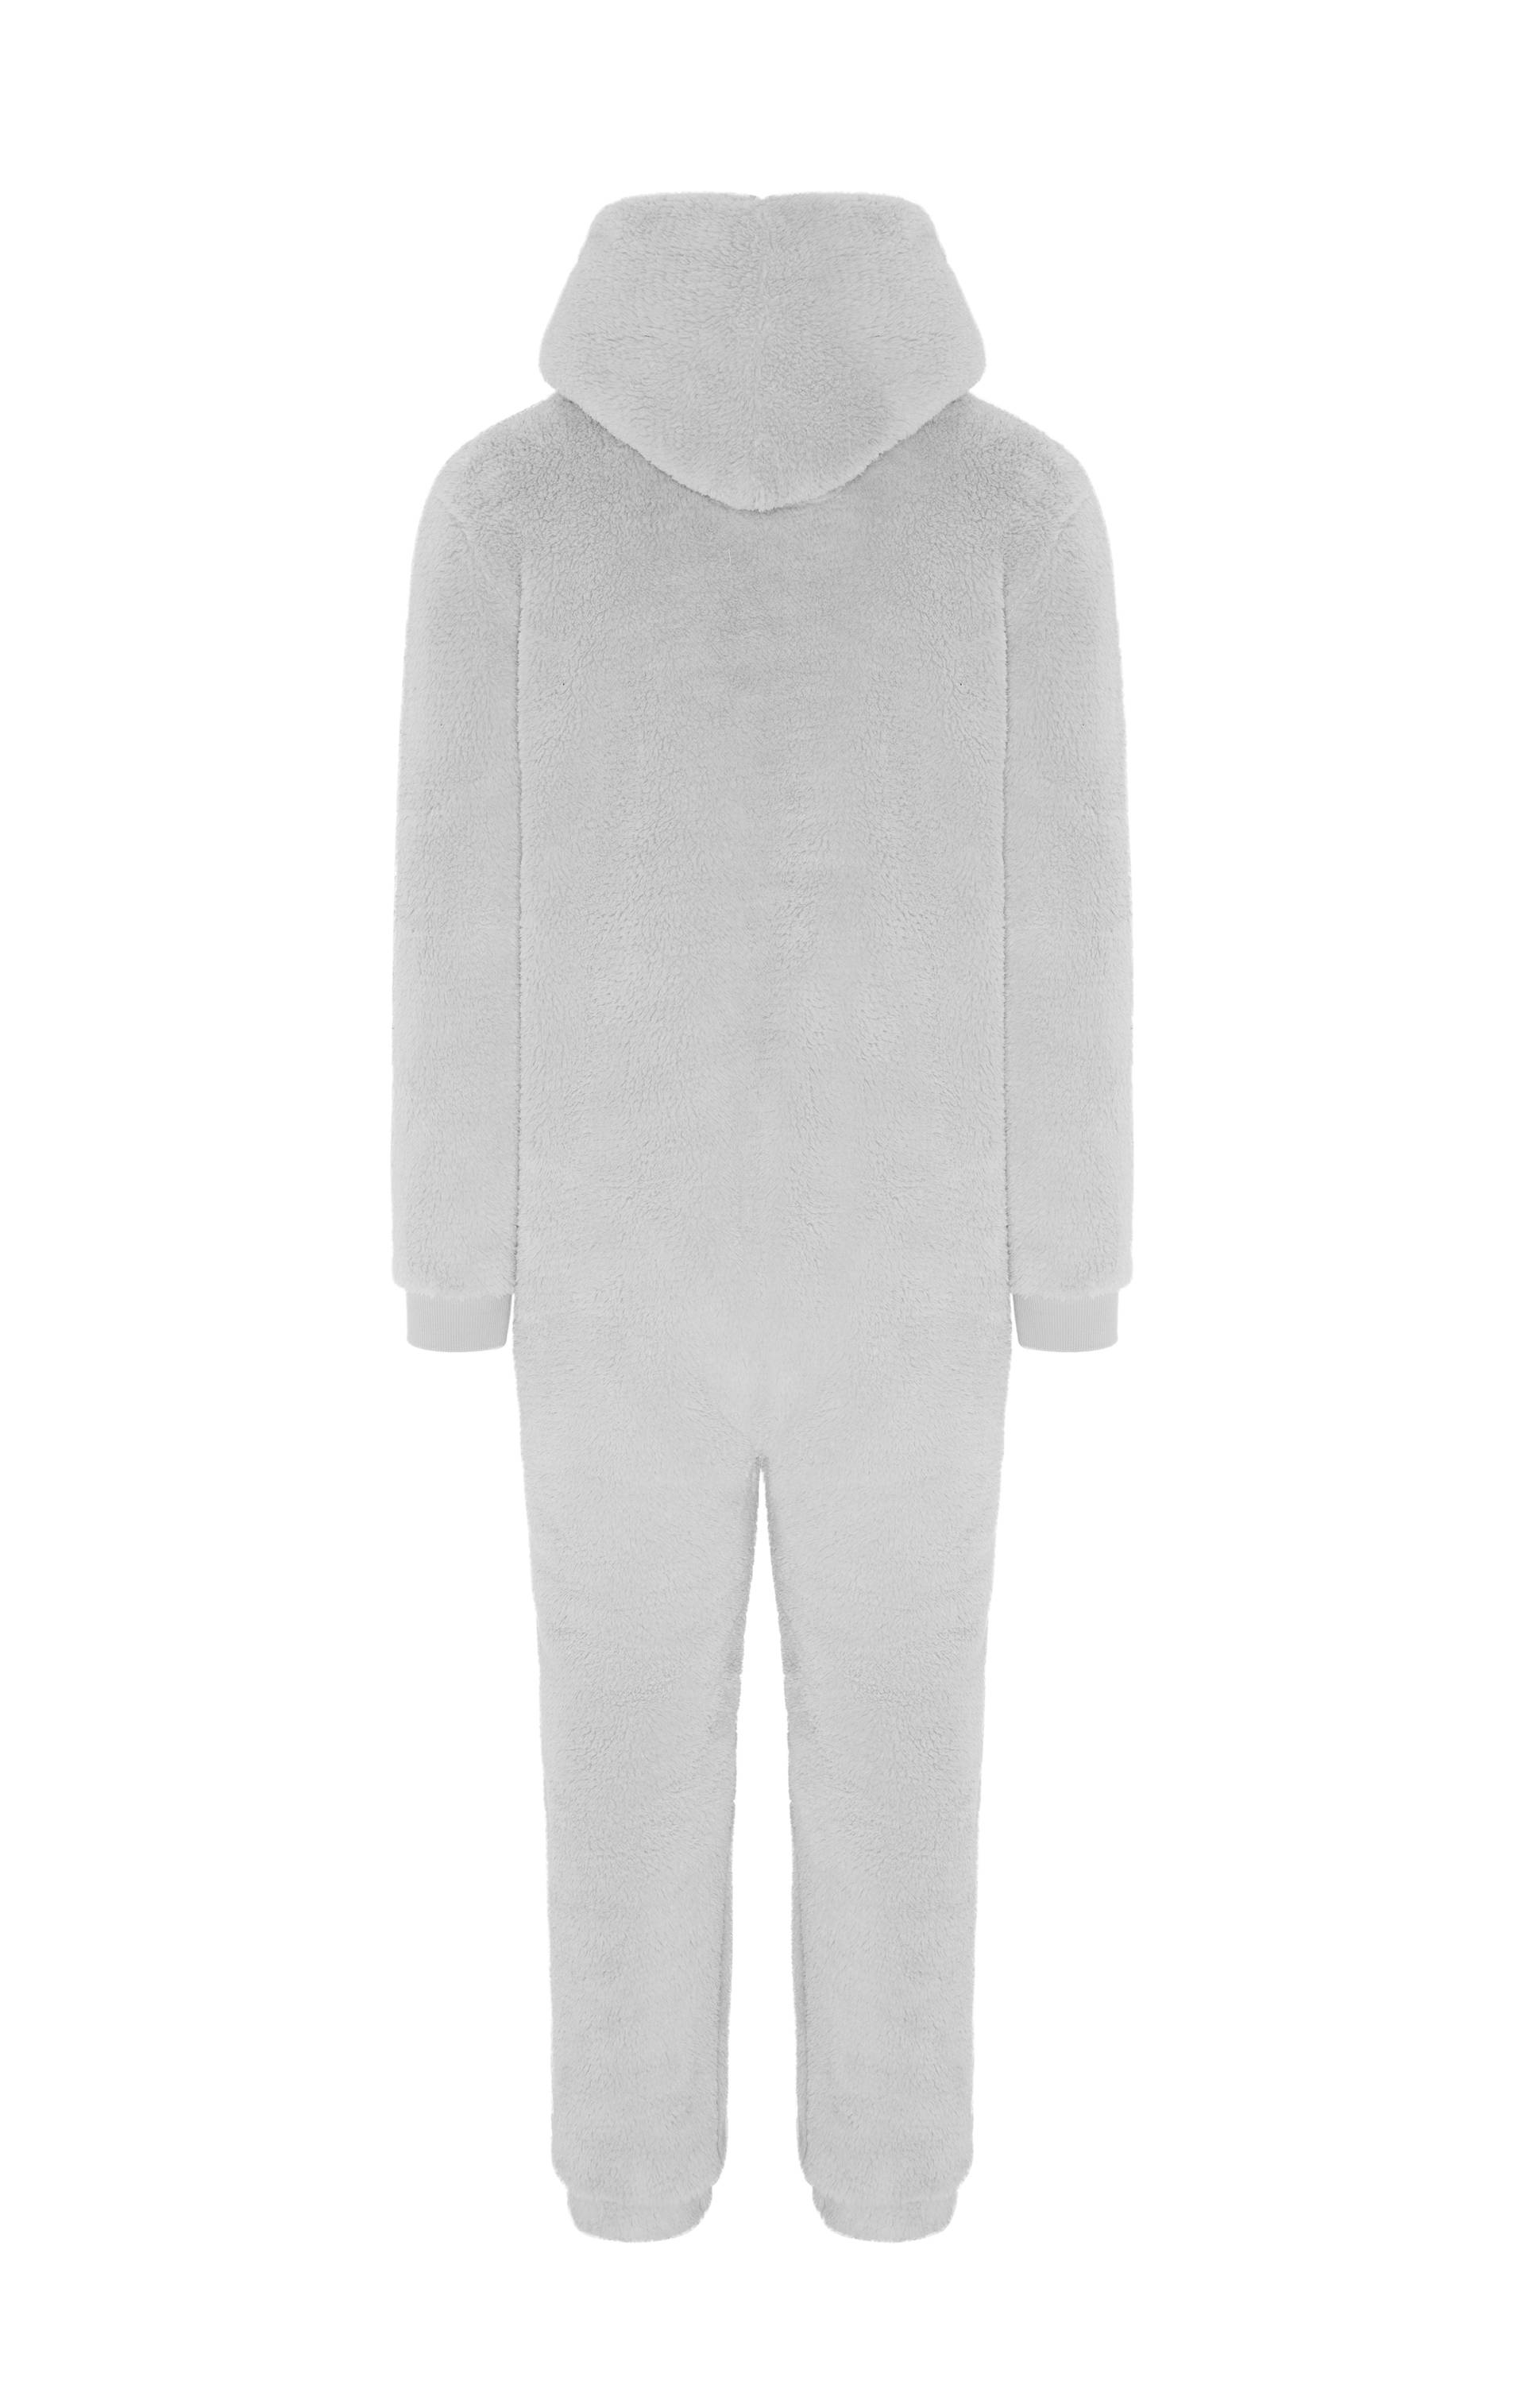 Onepiece The Puppy Jumpsuit Light Grey - 2